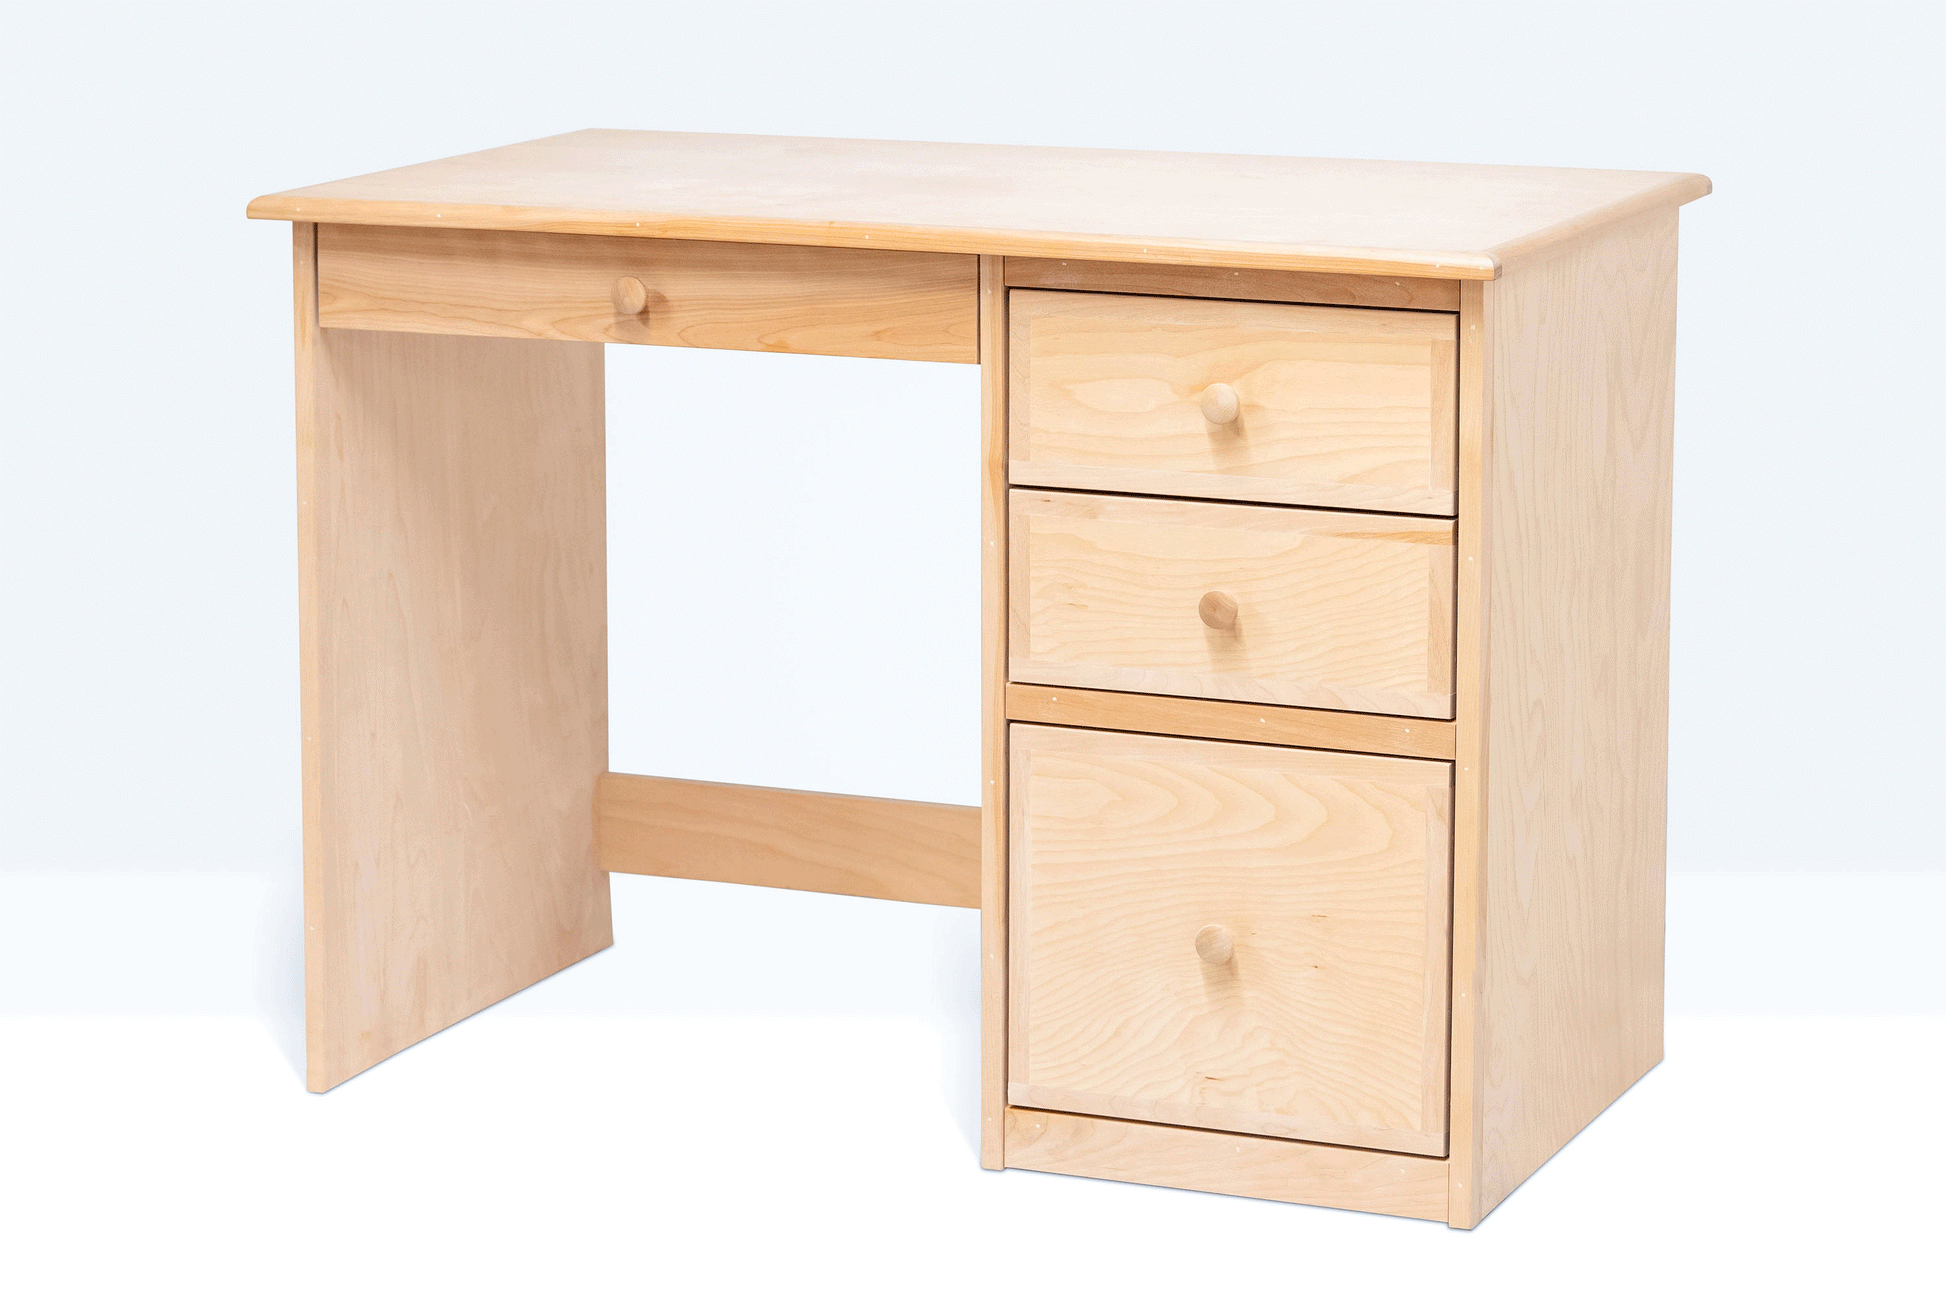 Berkshire Student Desk with Drawers shown with Drawers open to highlight storage space.